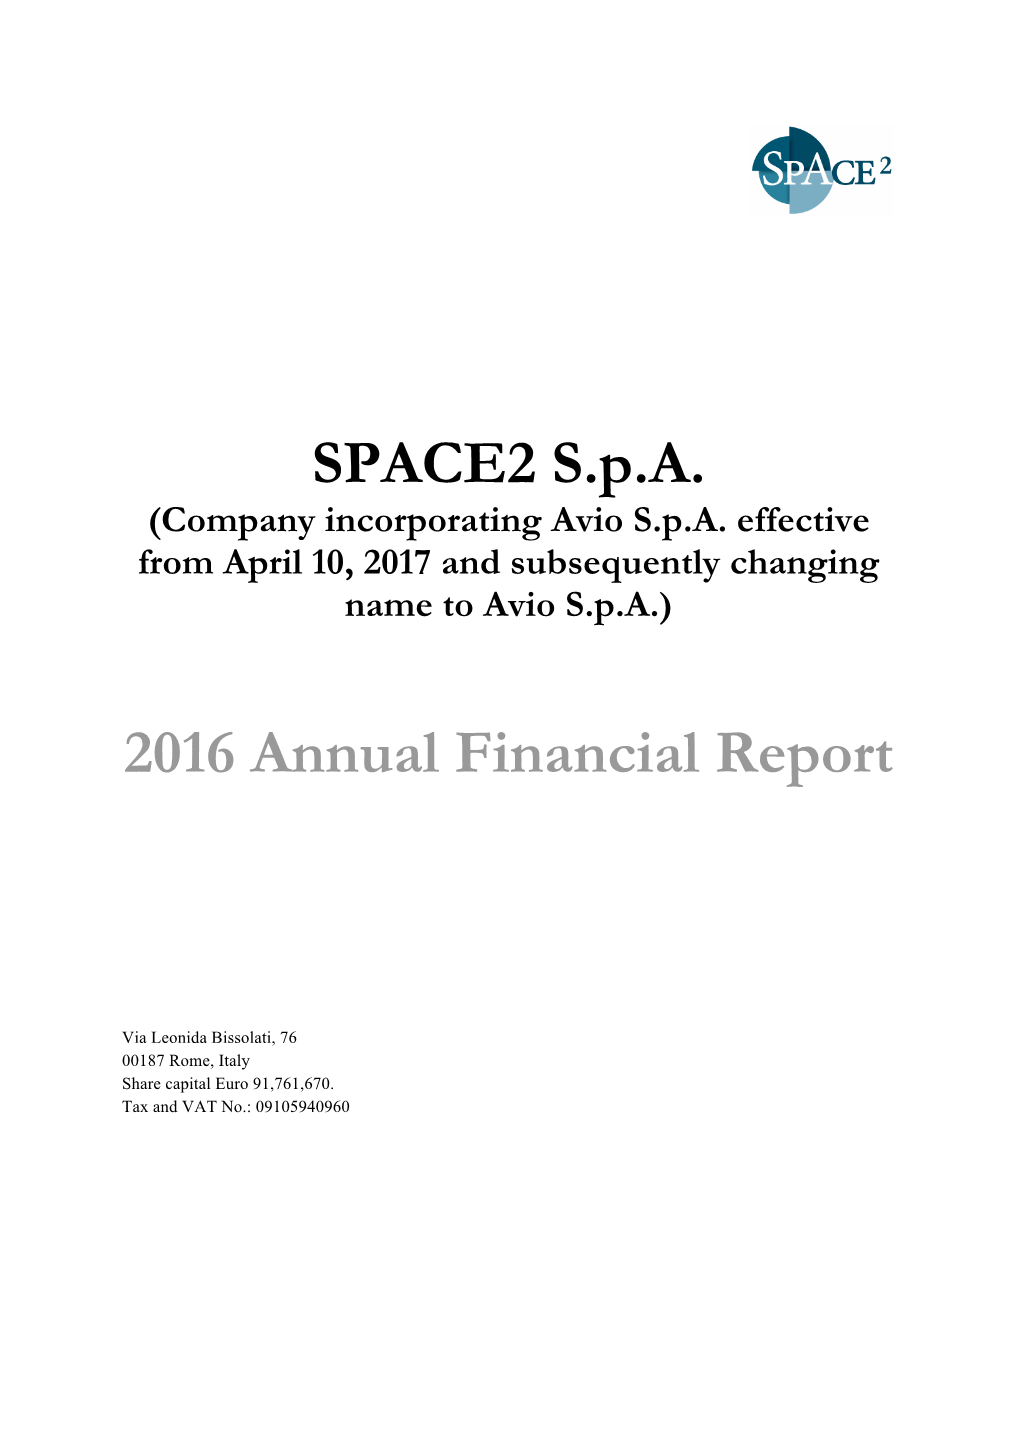 SPACE2 S.P.A. 2016 Annual Financial Report